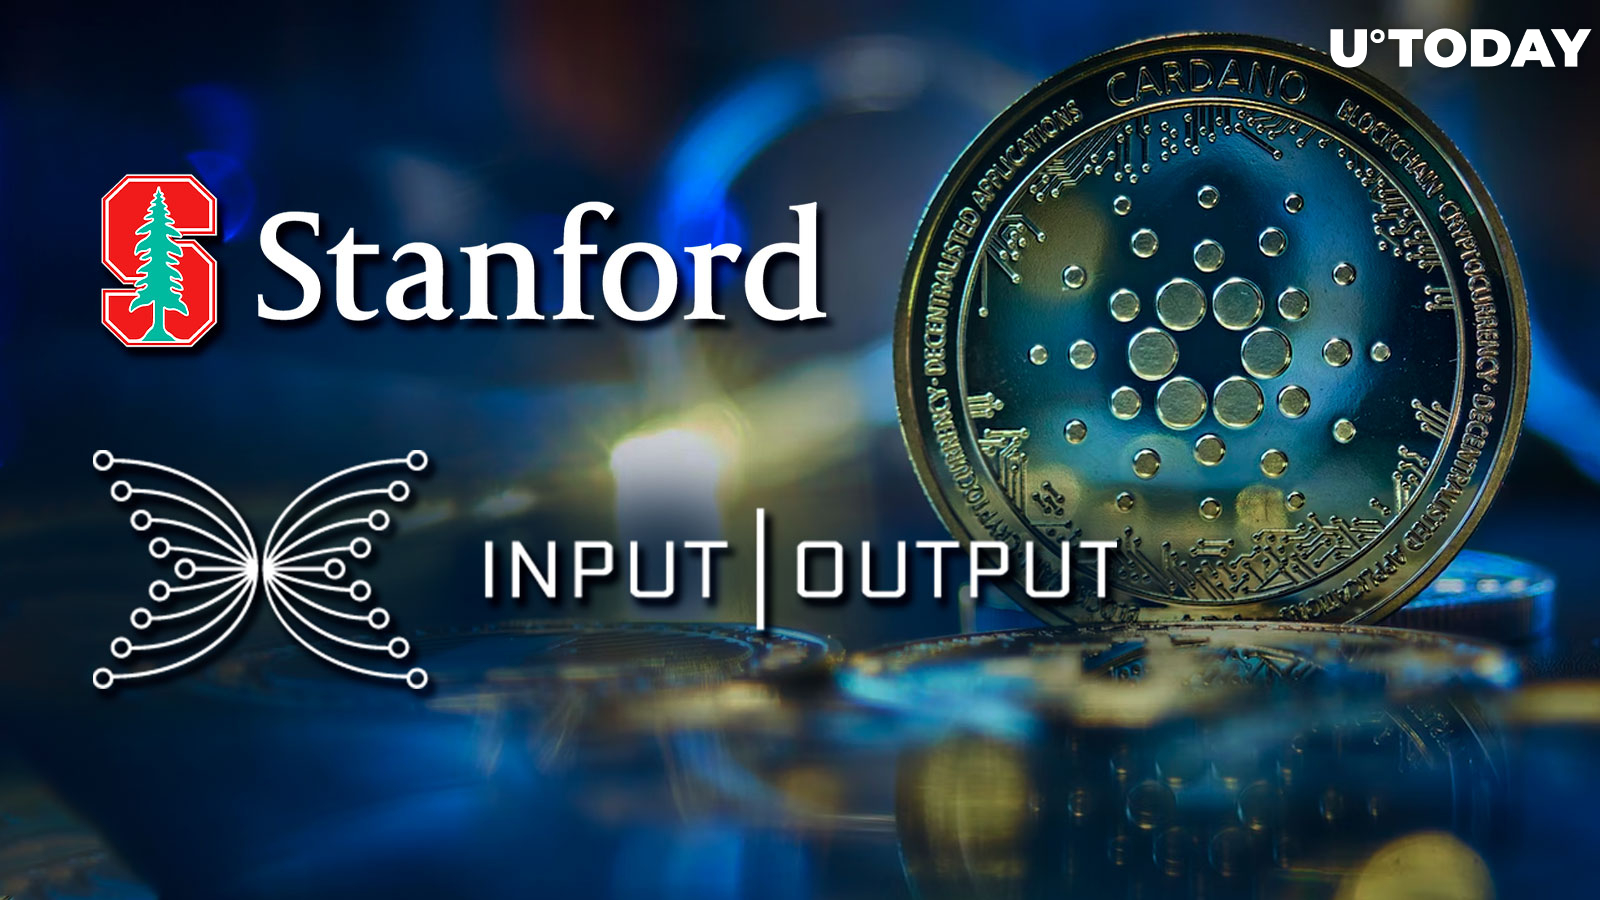 Cardano's Input Output Announces Research Hub at Stanford